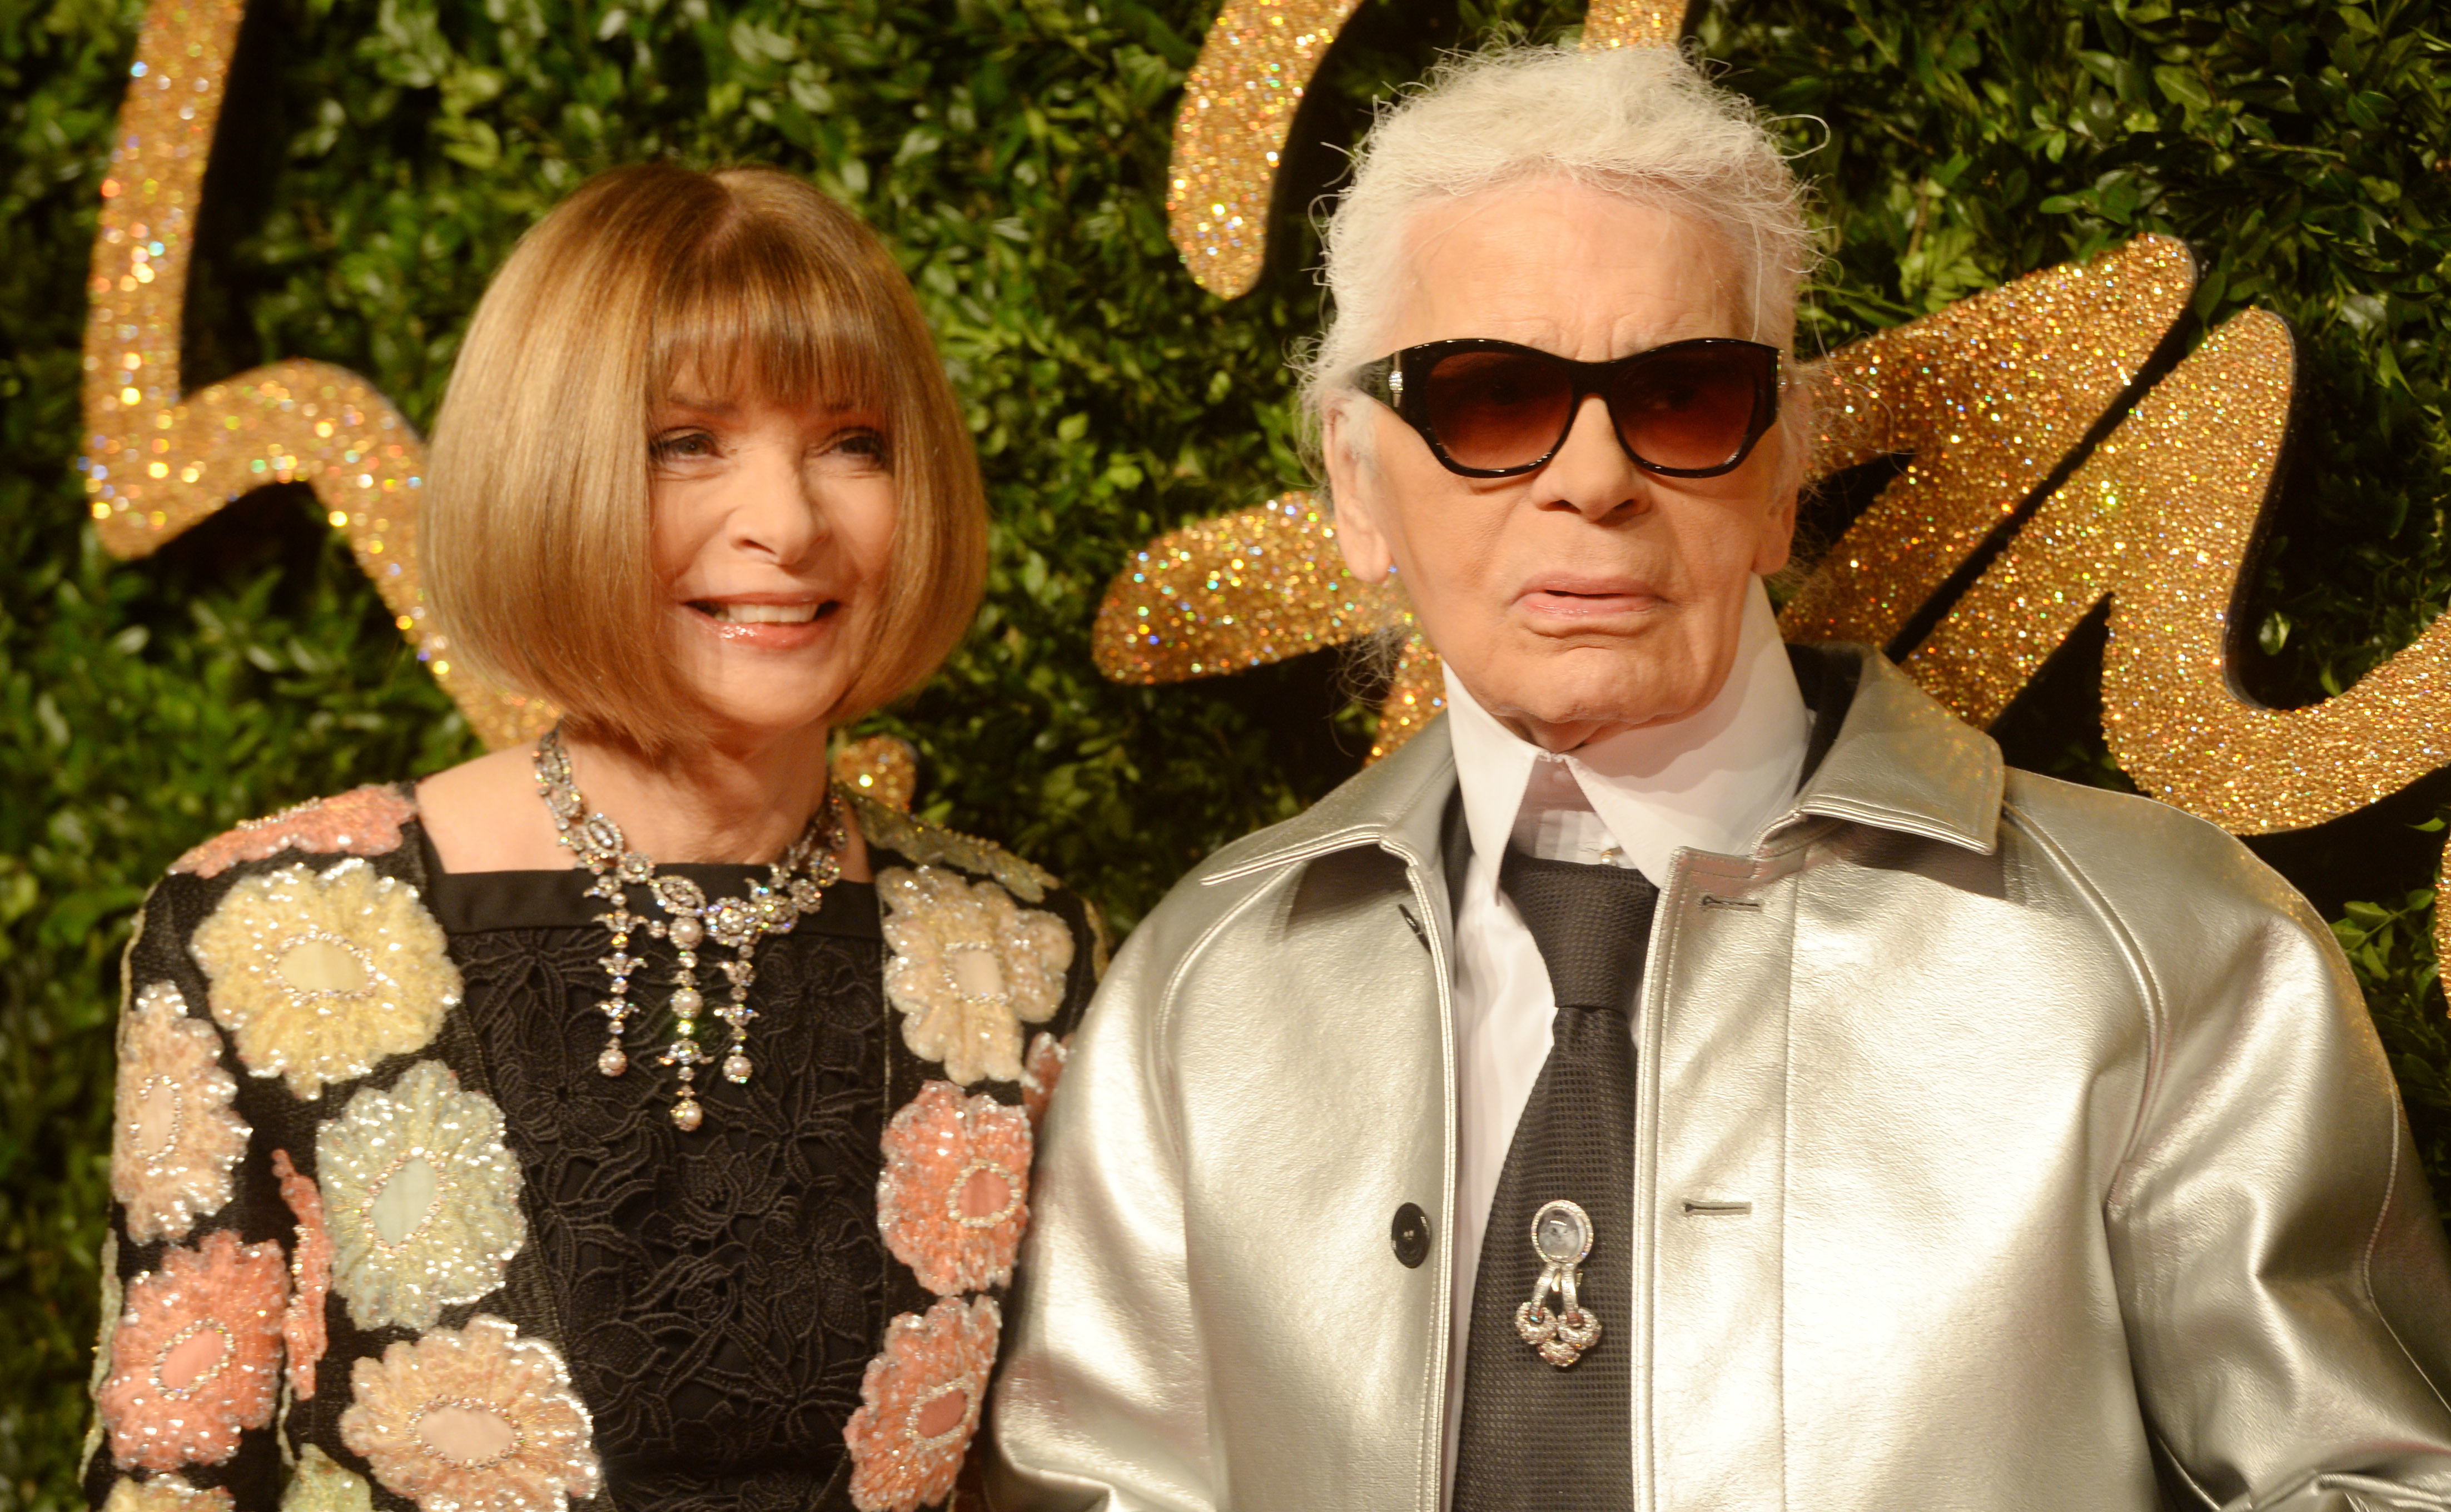 Anna Wintour defends honoring Karl Lagerfeld at 2023 Met Gala, despite controversial remarks Baltimore